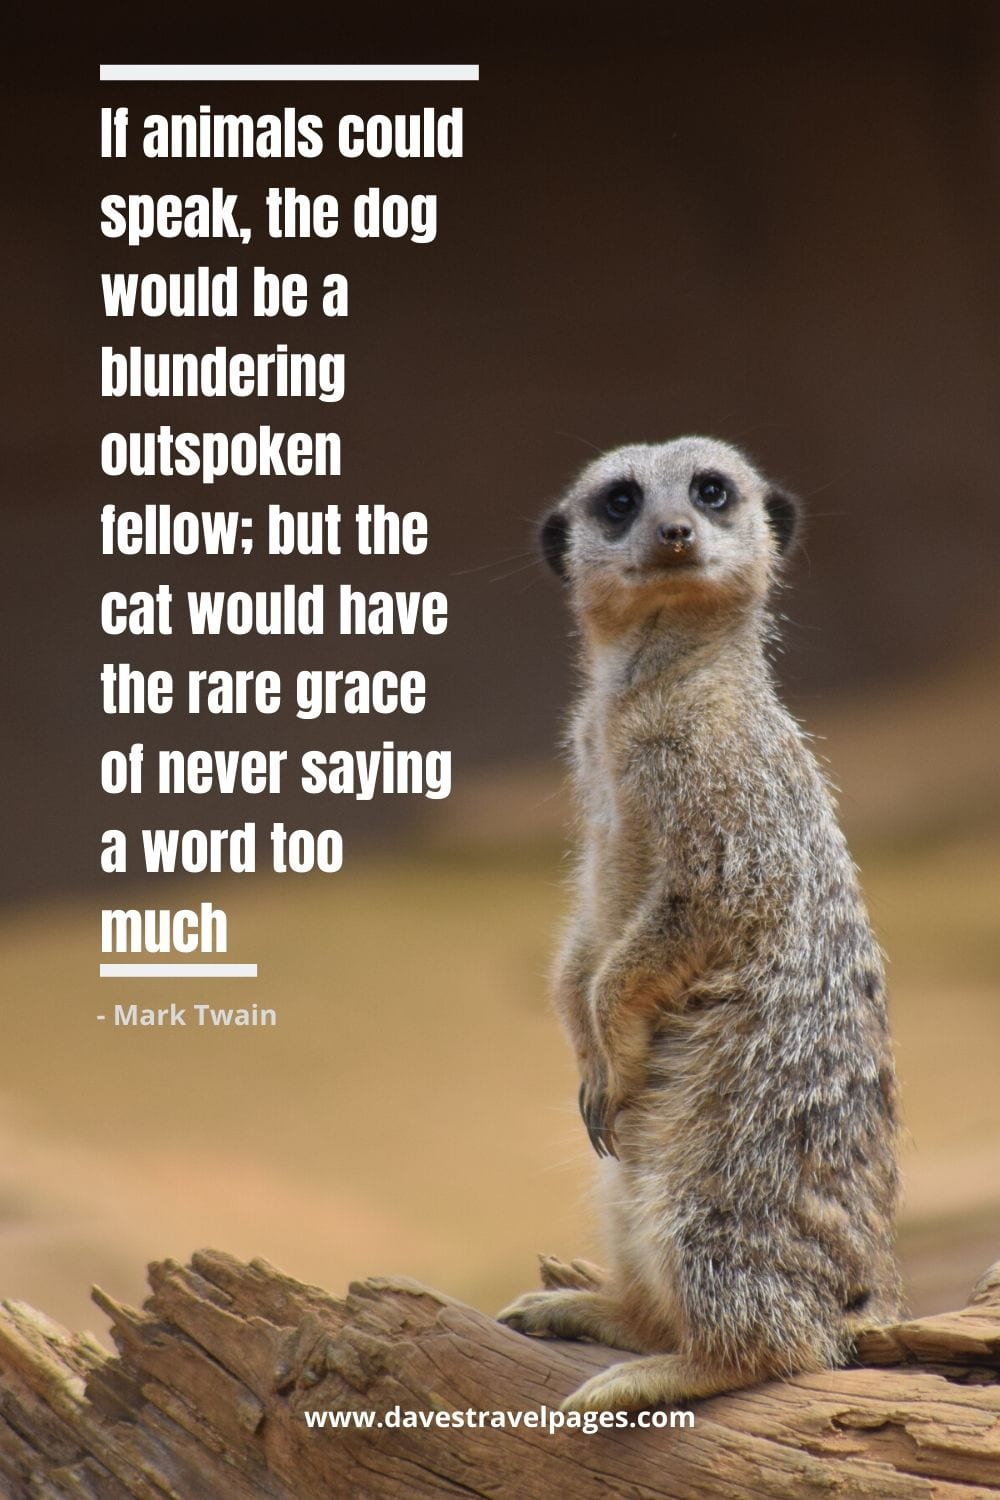 Mark Twain Animal Quote - “If animals could speak, the dog would be a blundering outspoken fellow; but the cat would have the rare grace of never saying a word too much.”